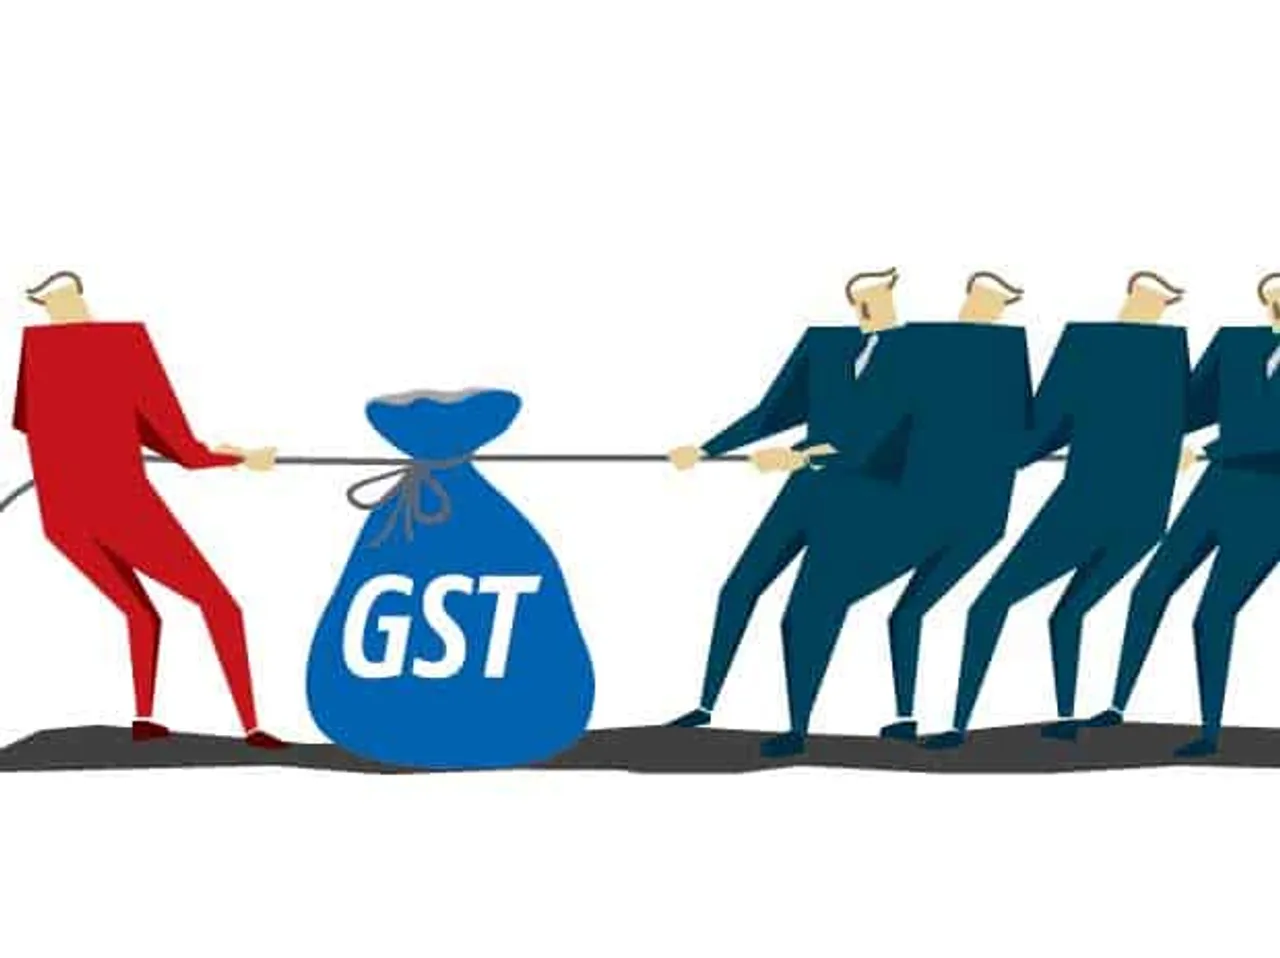 TN Partners lobby to reduce 28% GST Rate